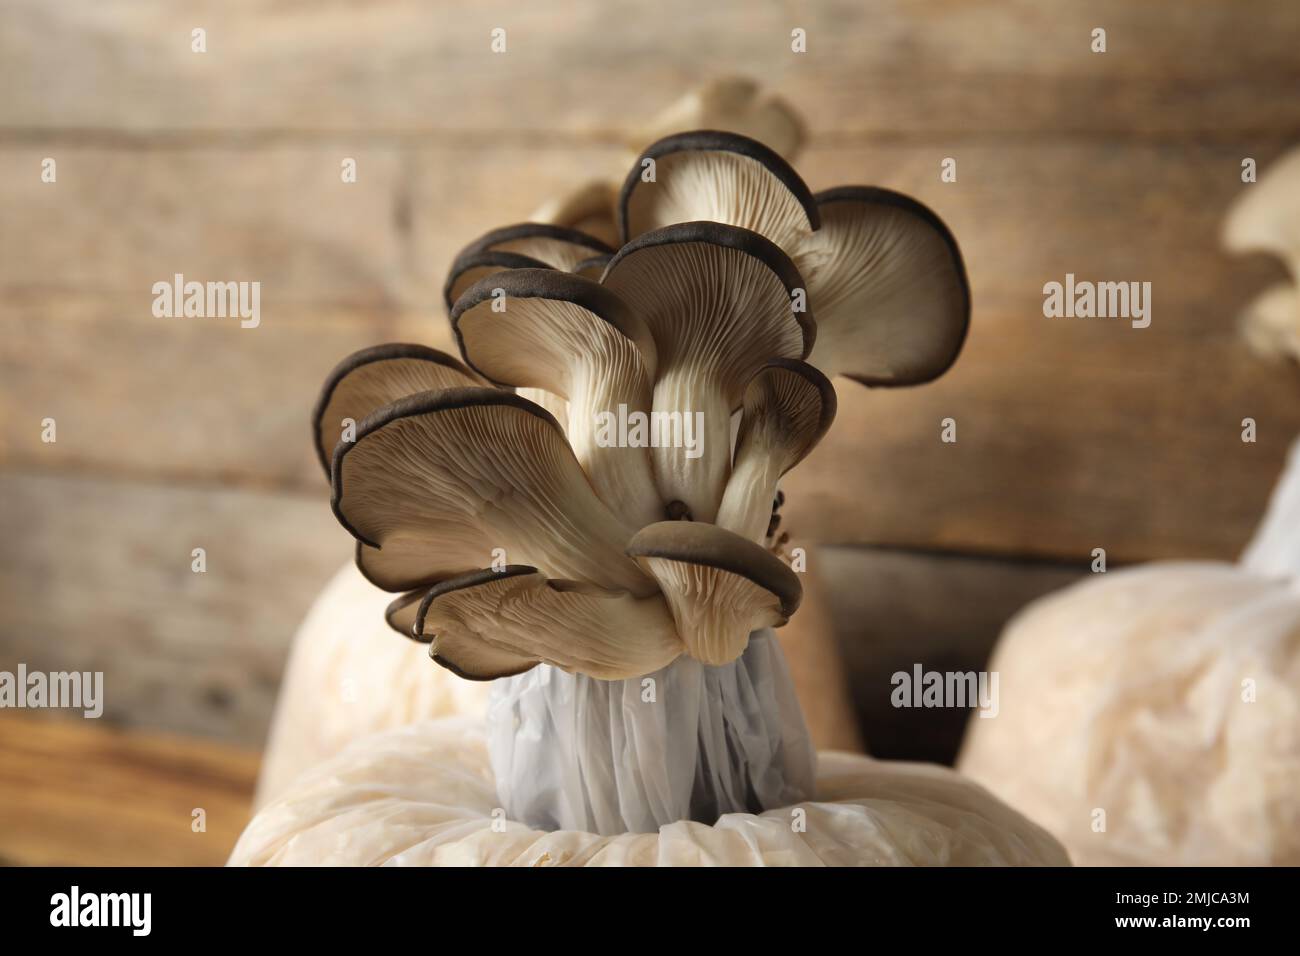 Oyster mushrooms growing in sawdust on wooden table, closeup. Cultivation of fungi Stock Photo